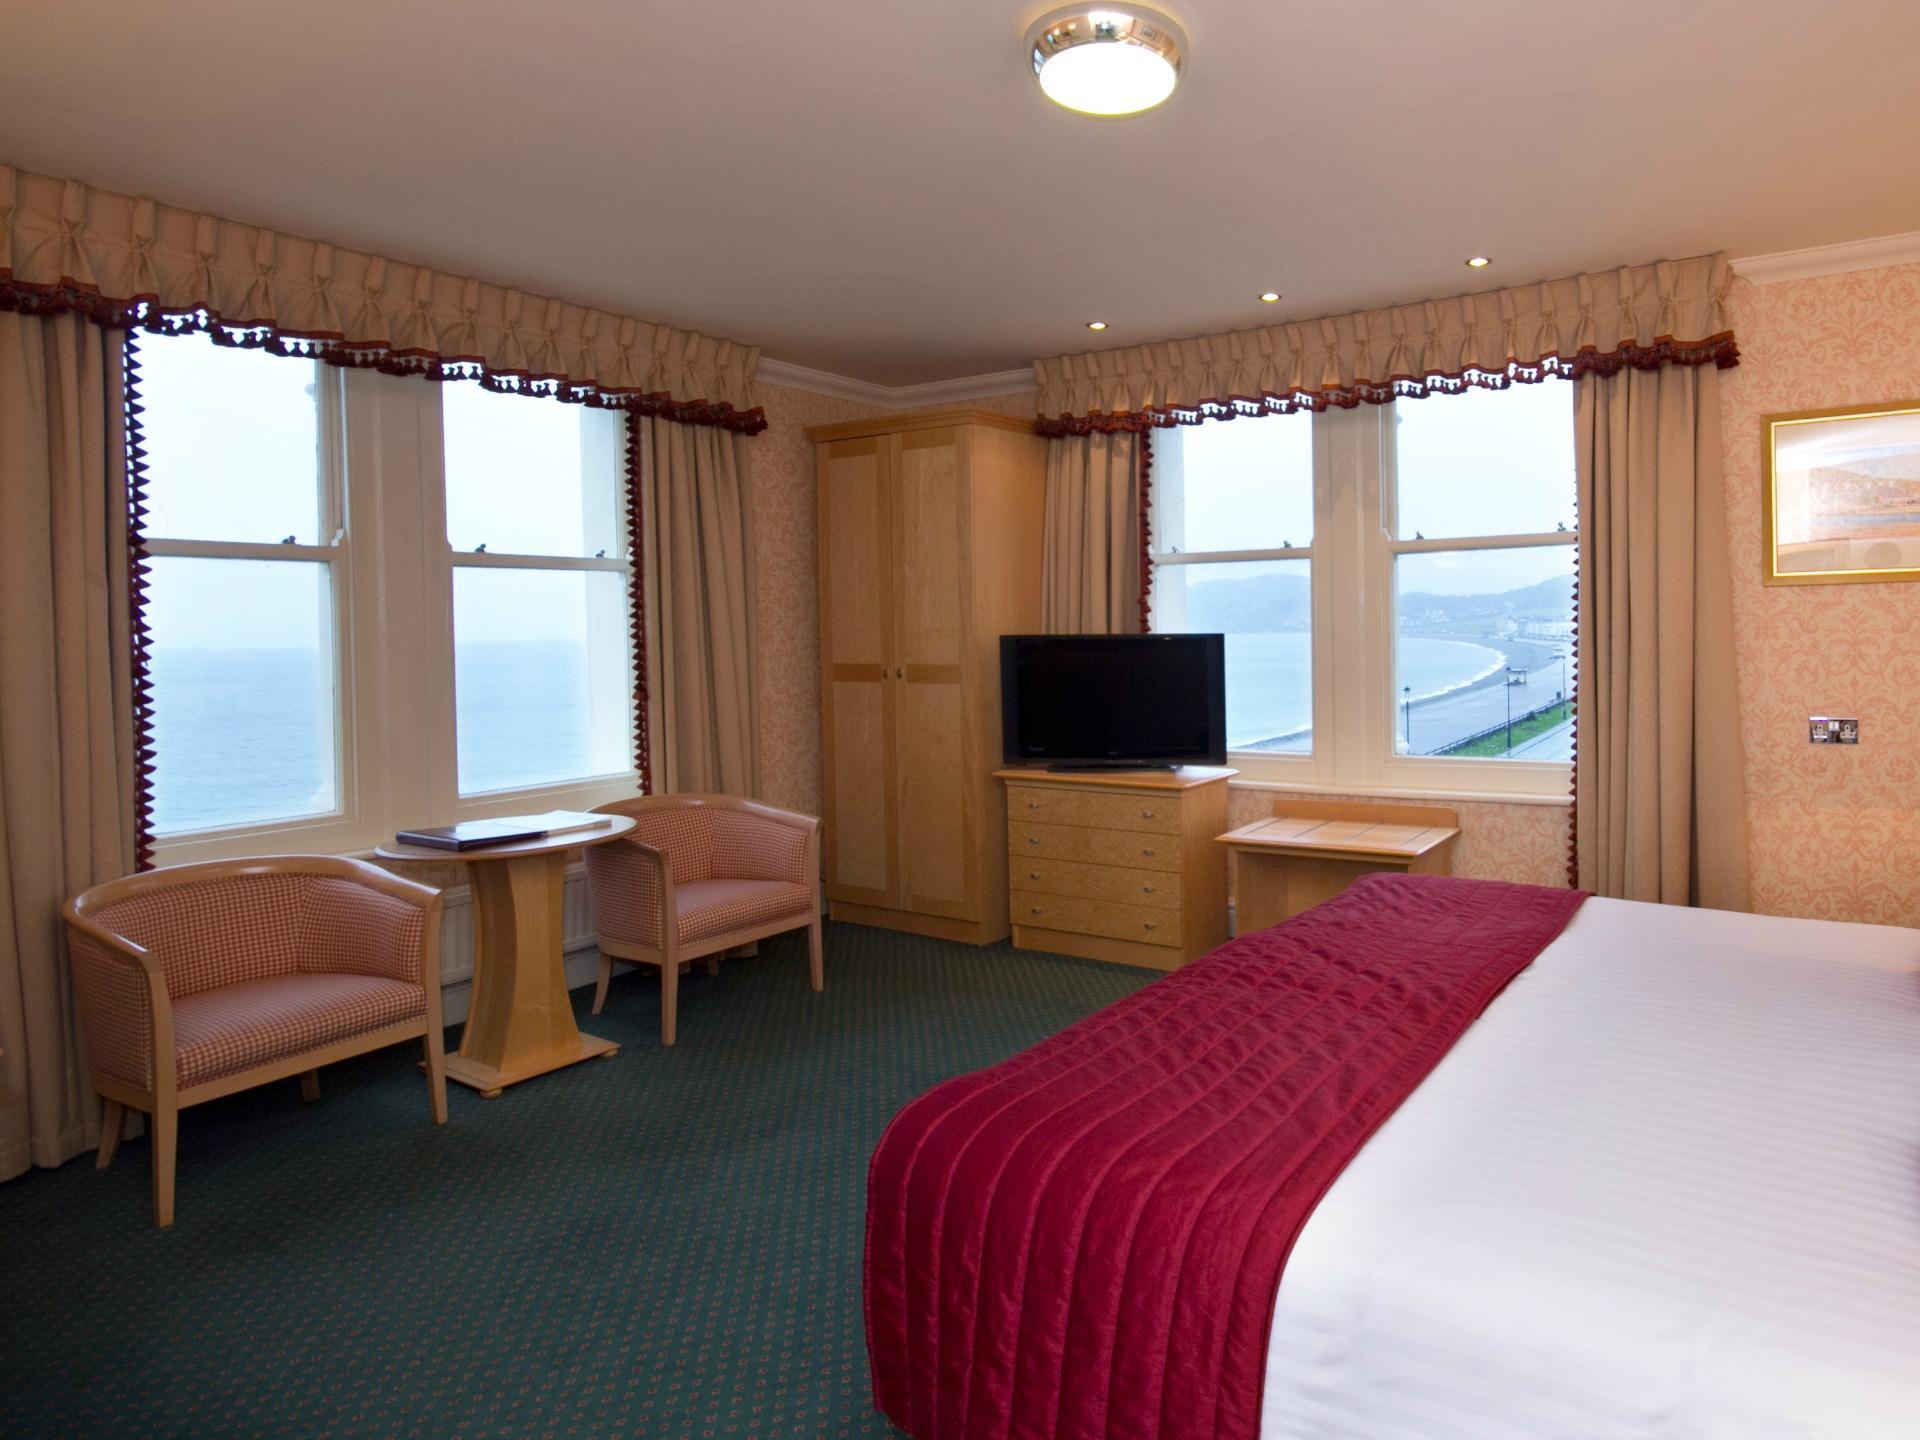 A front facing bedroom has views of the bay